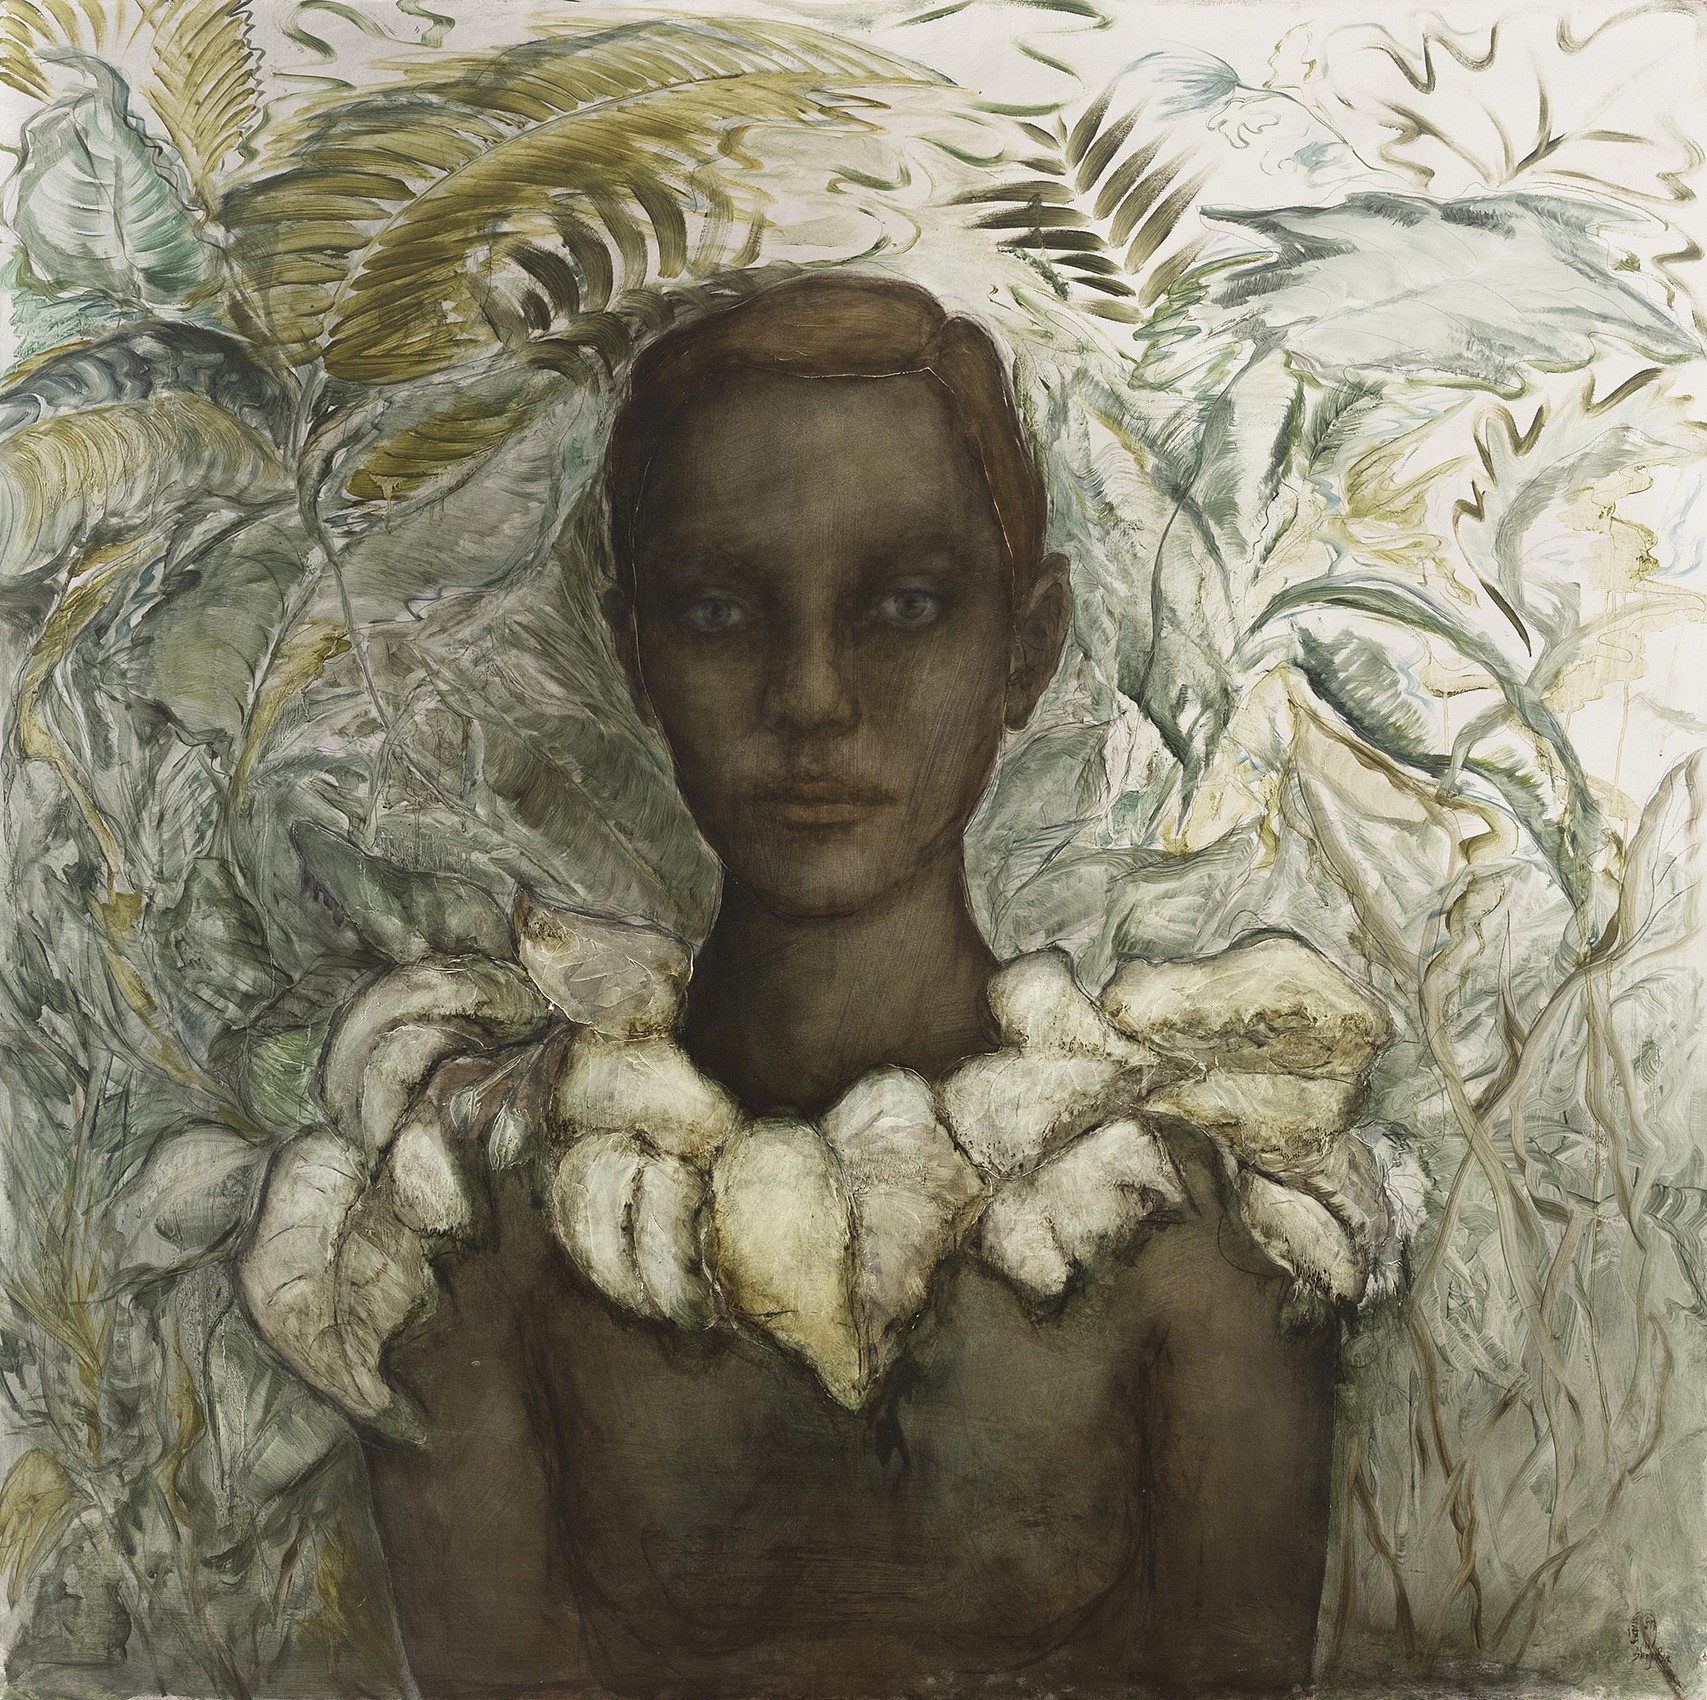 Shany van den Berg, Antheia Godess of the Garden, pencil, charcoal and oil on board, 130 x 130 cm